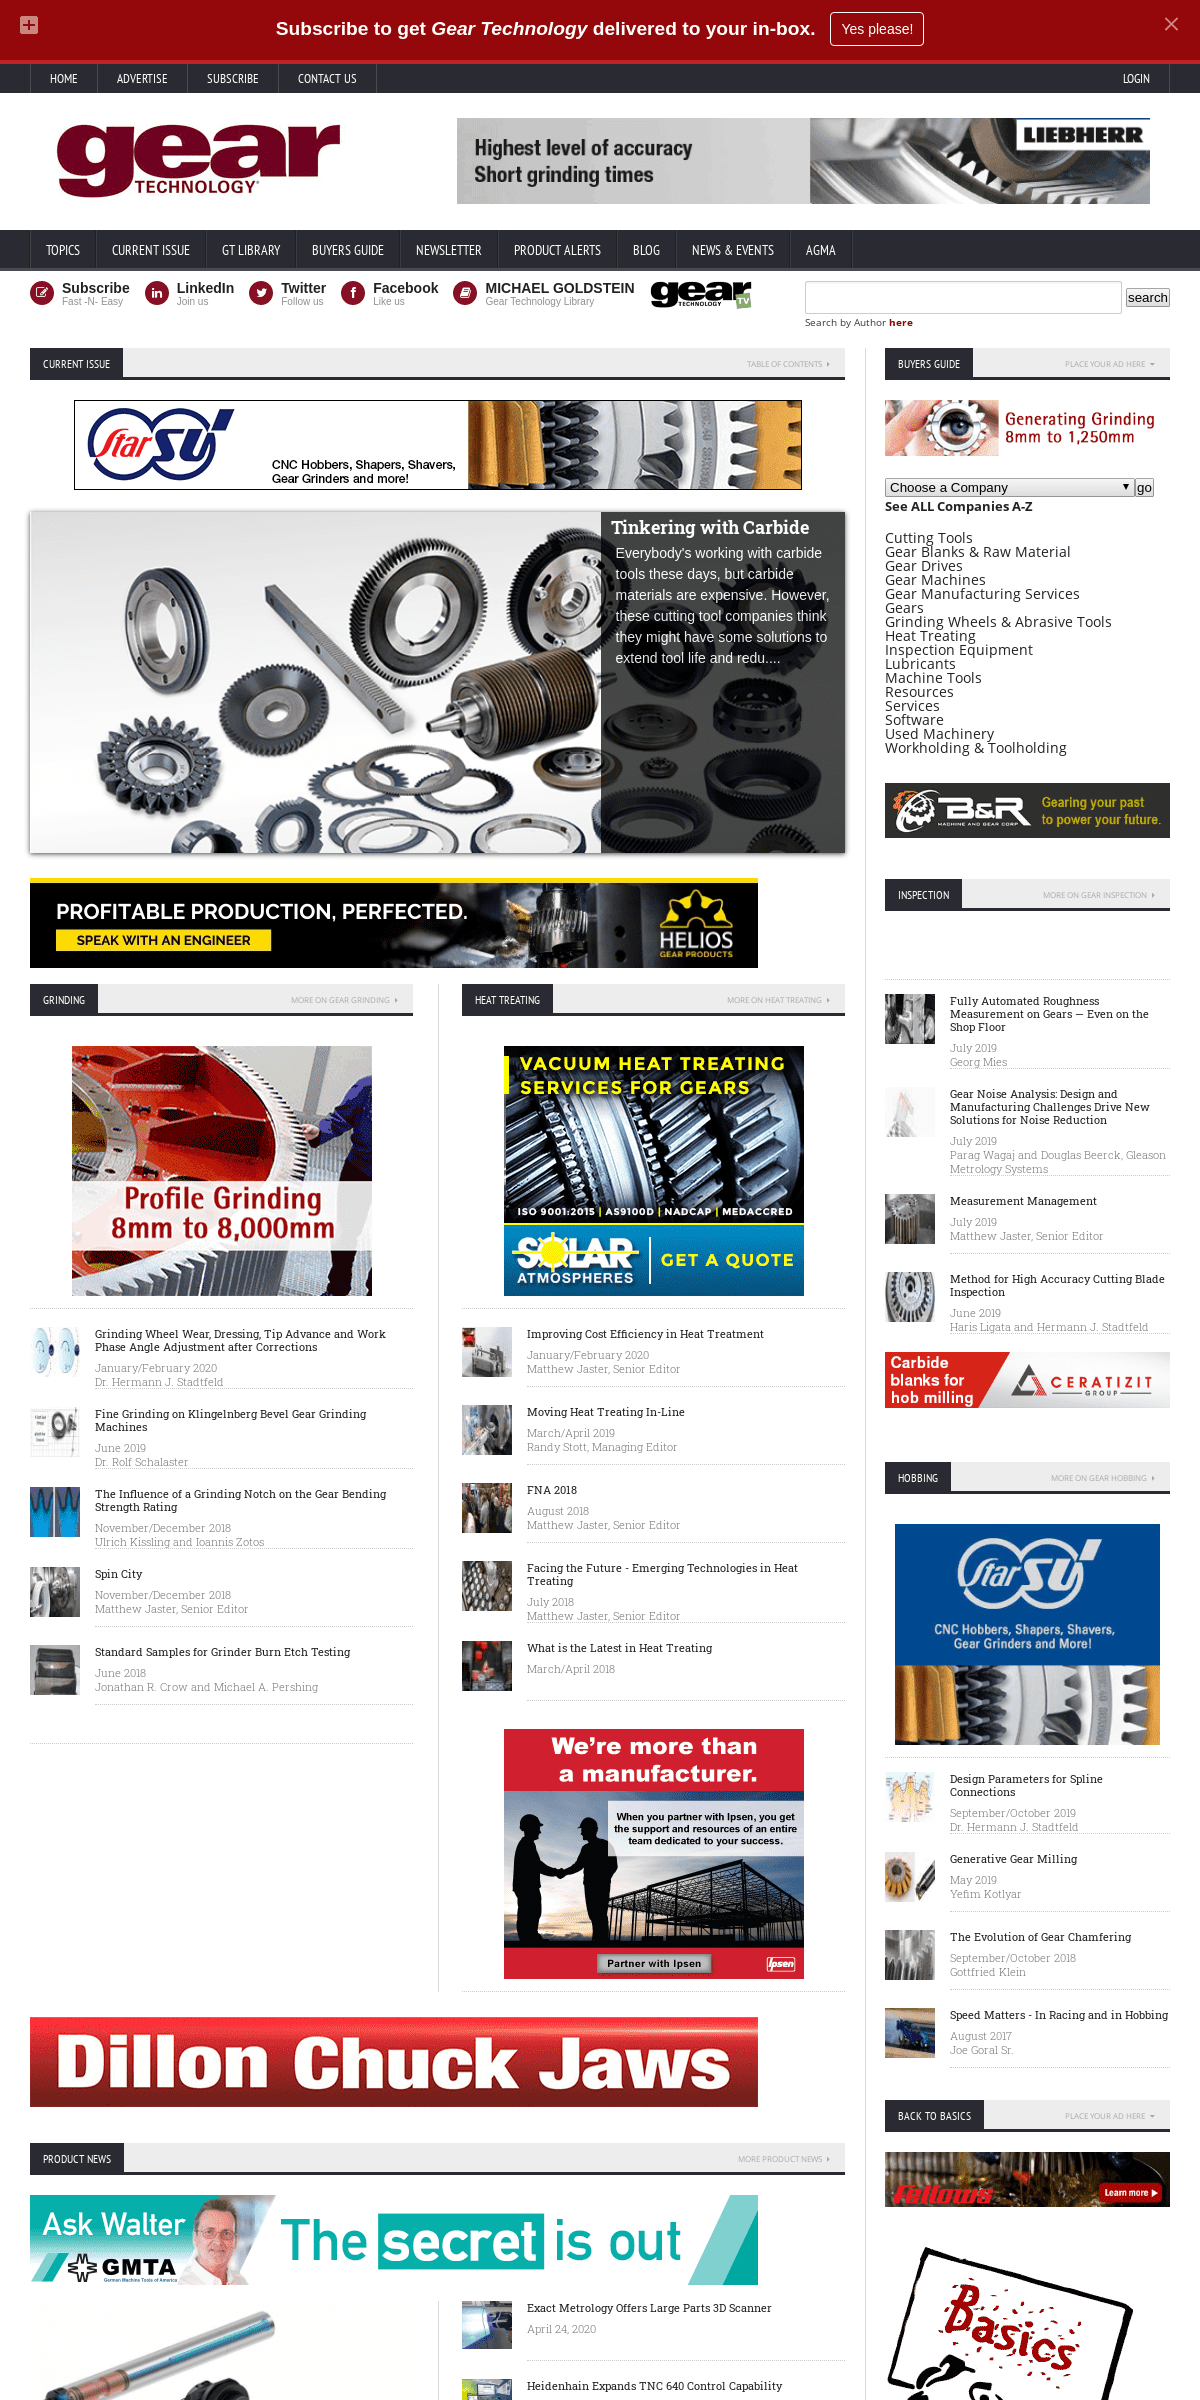 A complete backup of geartechnology.com